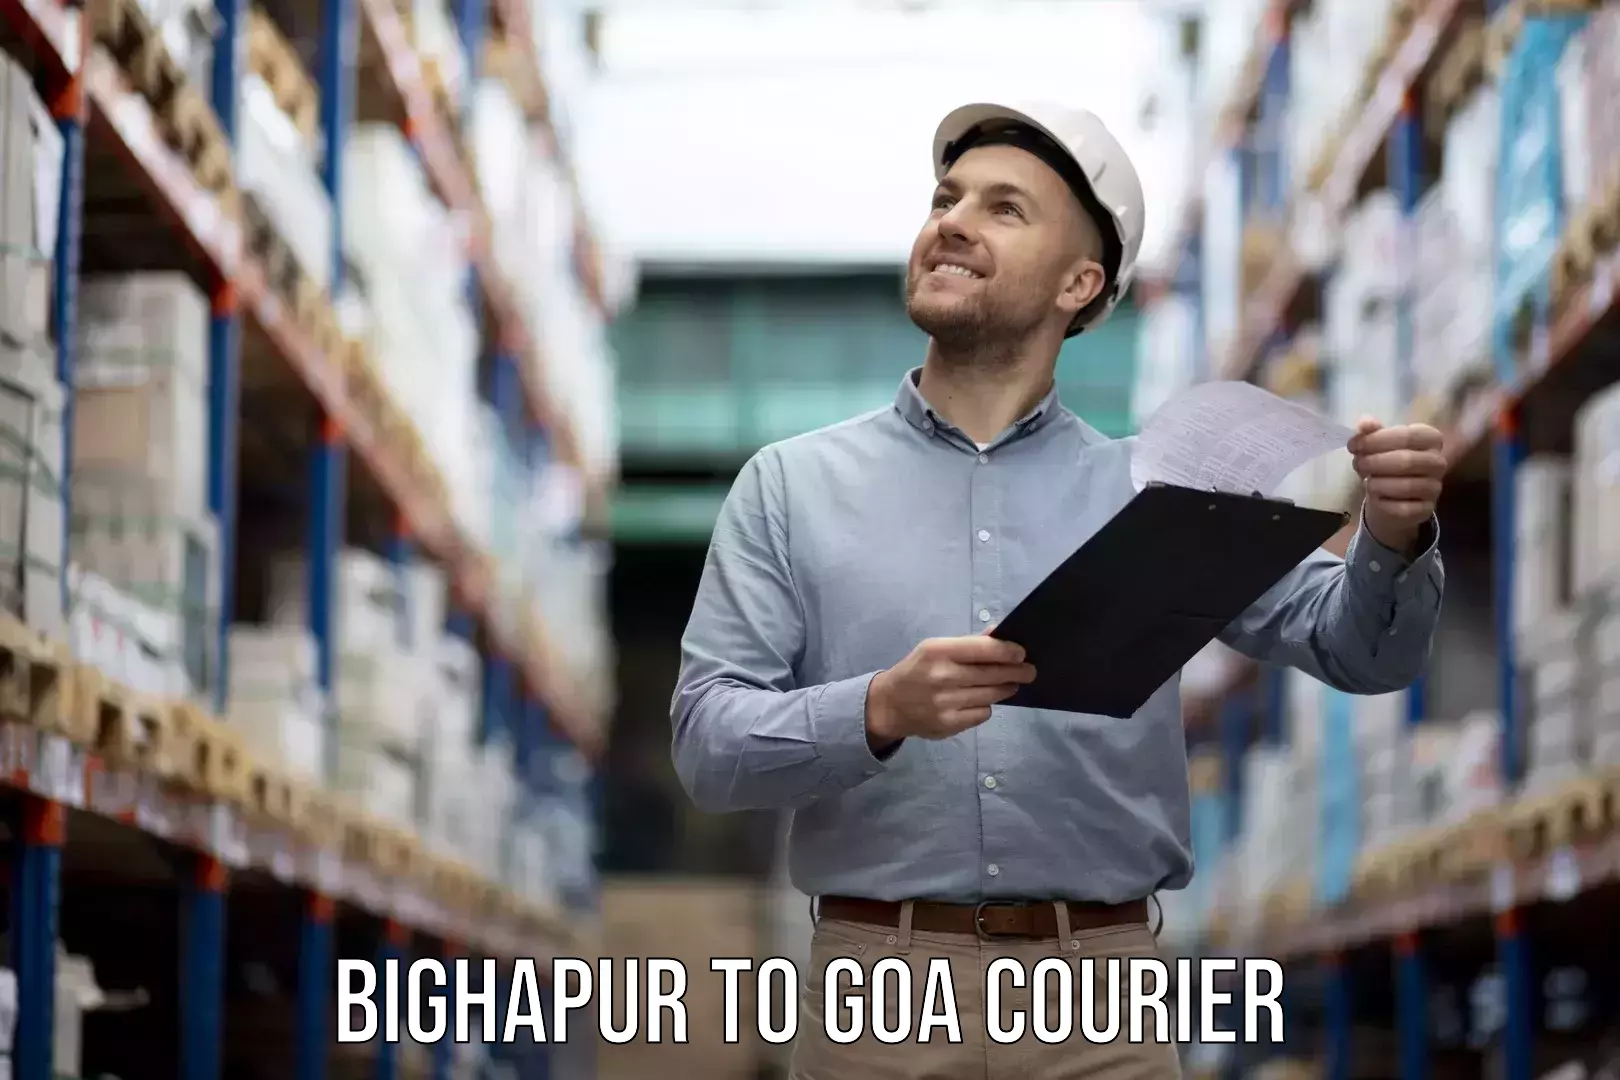 Home relocation experts Bighapur to IIT Goa